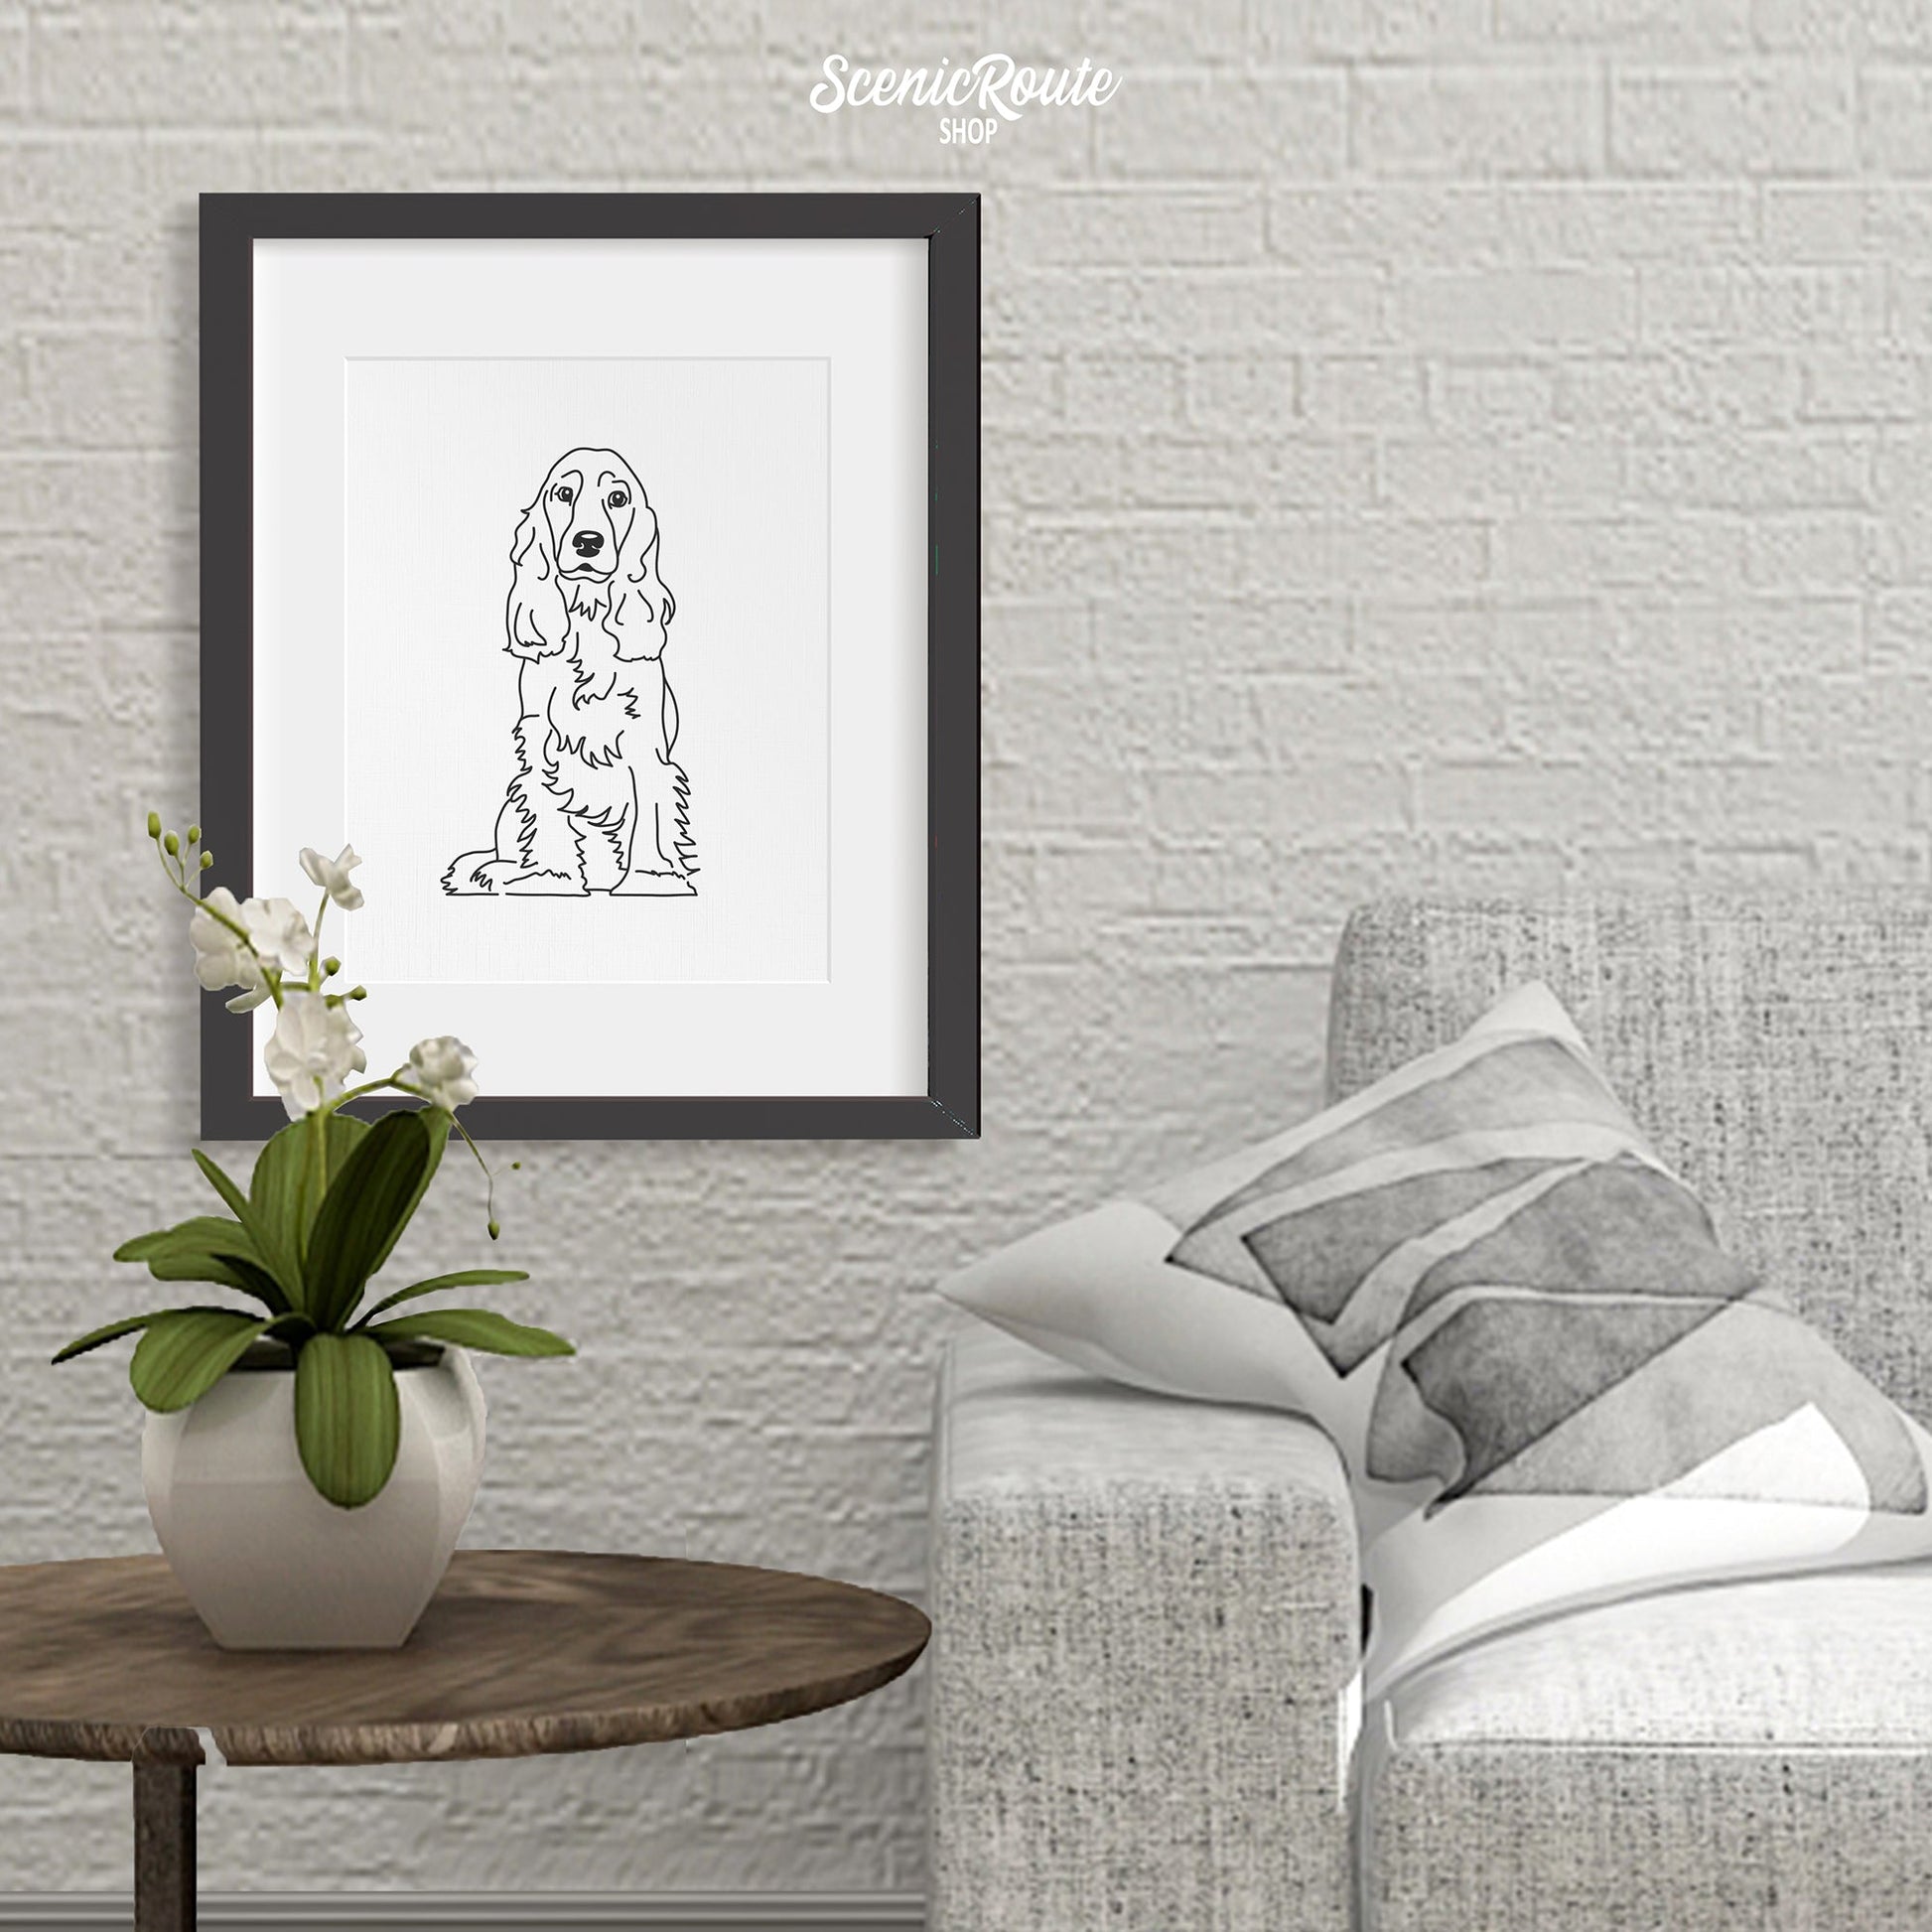 A framed line art drawing of a Cocker Spaniel dog on a brick wall hanging above a side table and plant next to a couch